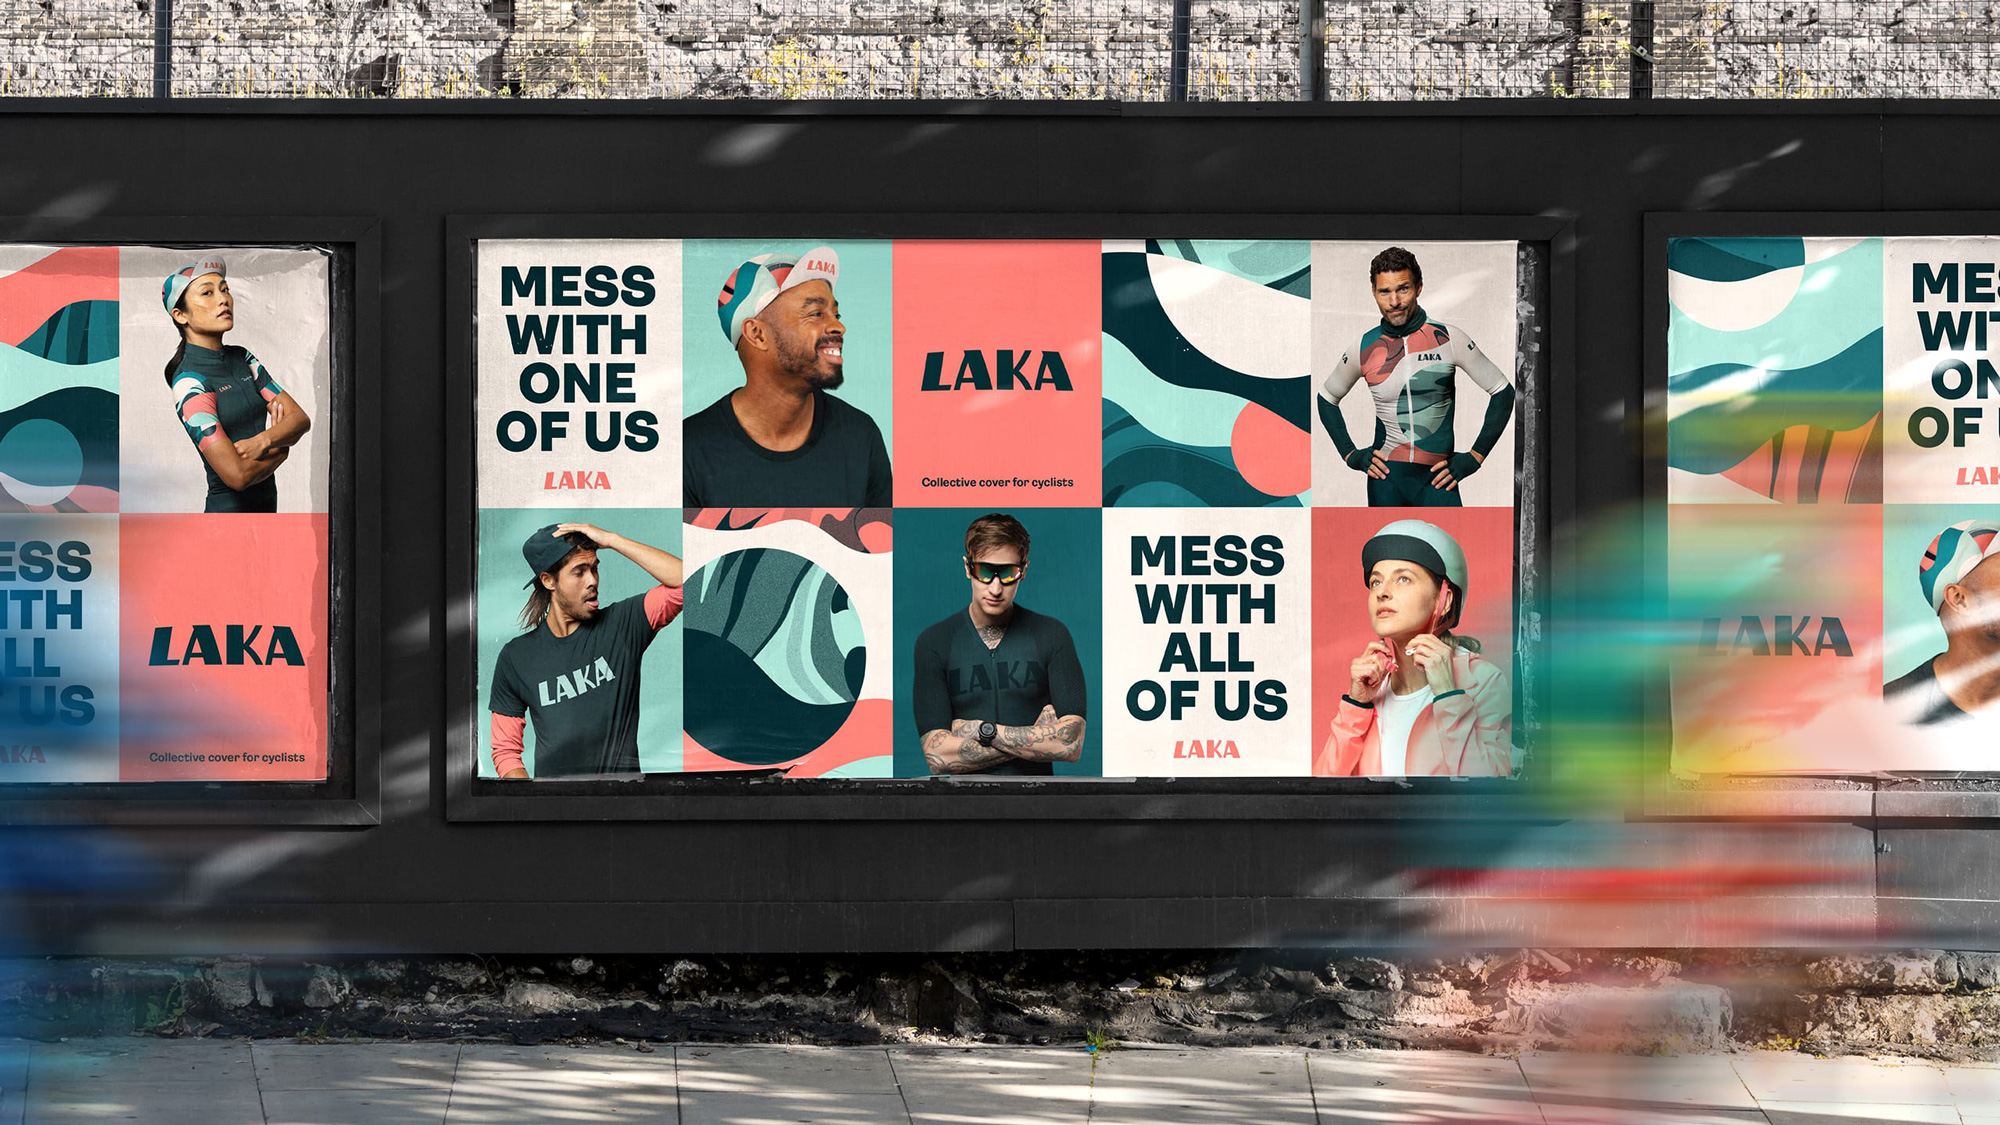 New Logo and Identity for Laka by Ragged Edge